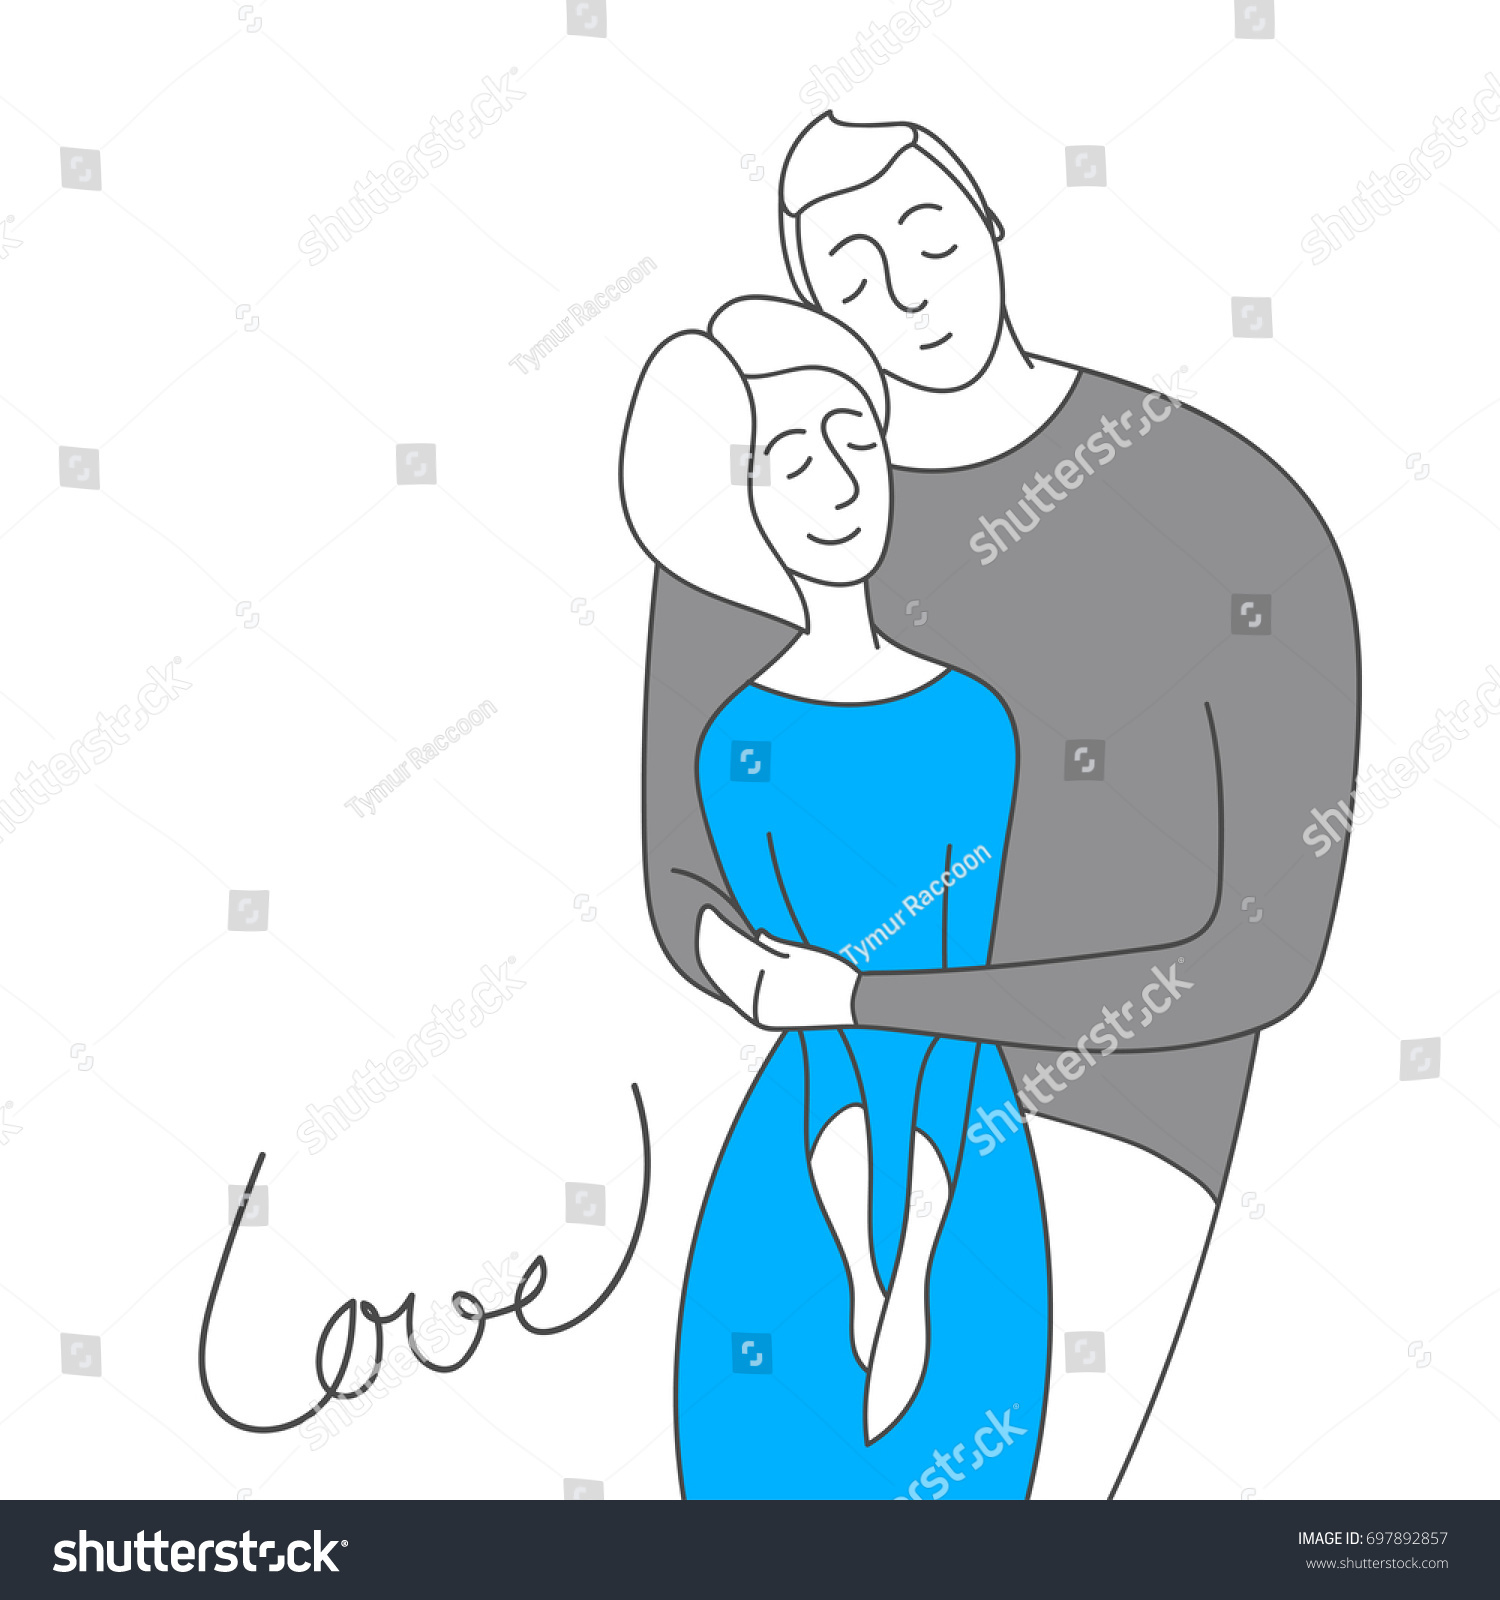 Embraces Of A Loving Couple Vector Illustration Royalty Free Stock Vector 697892857 